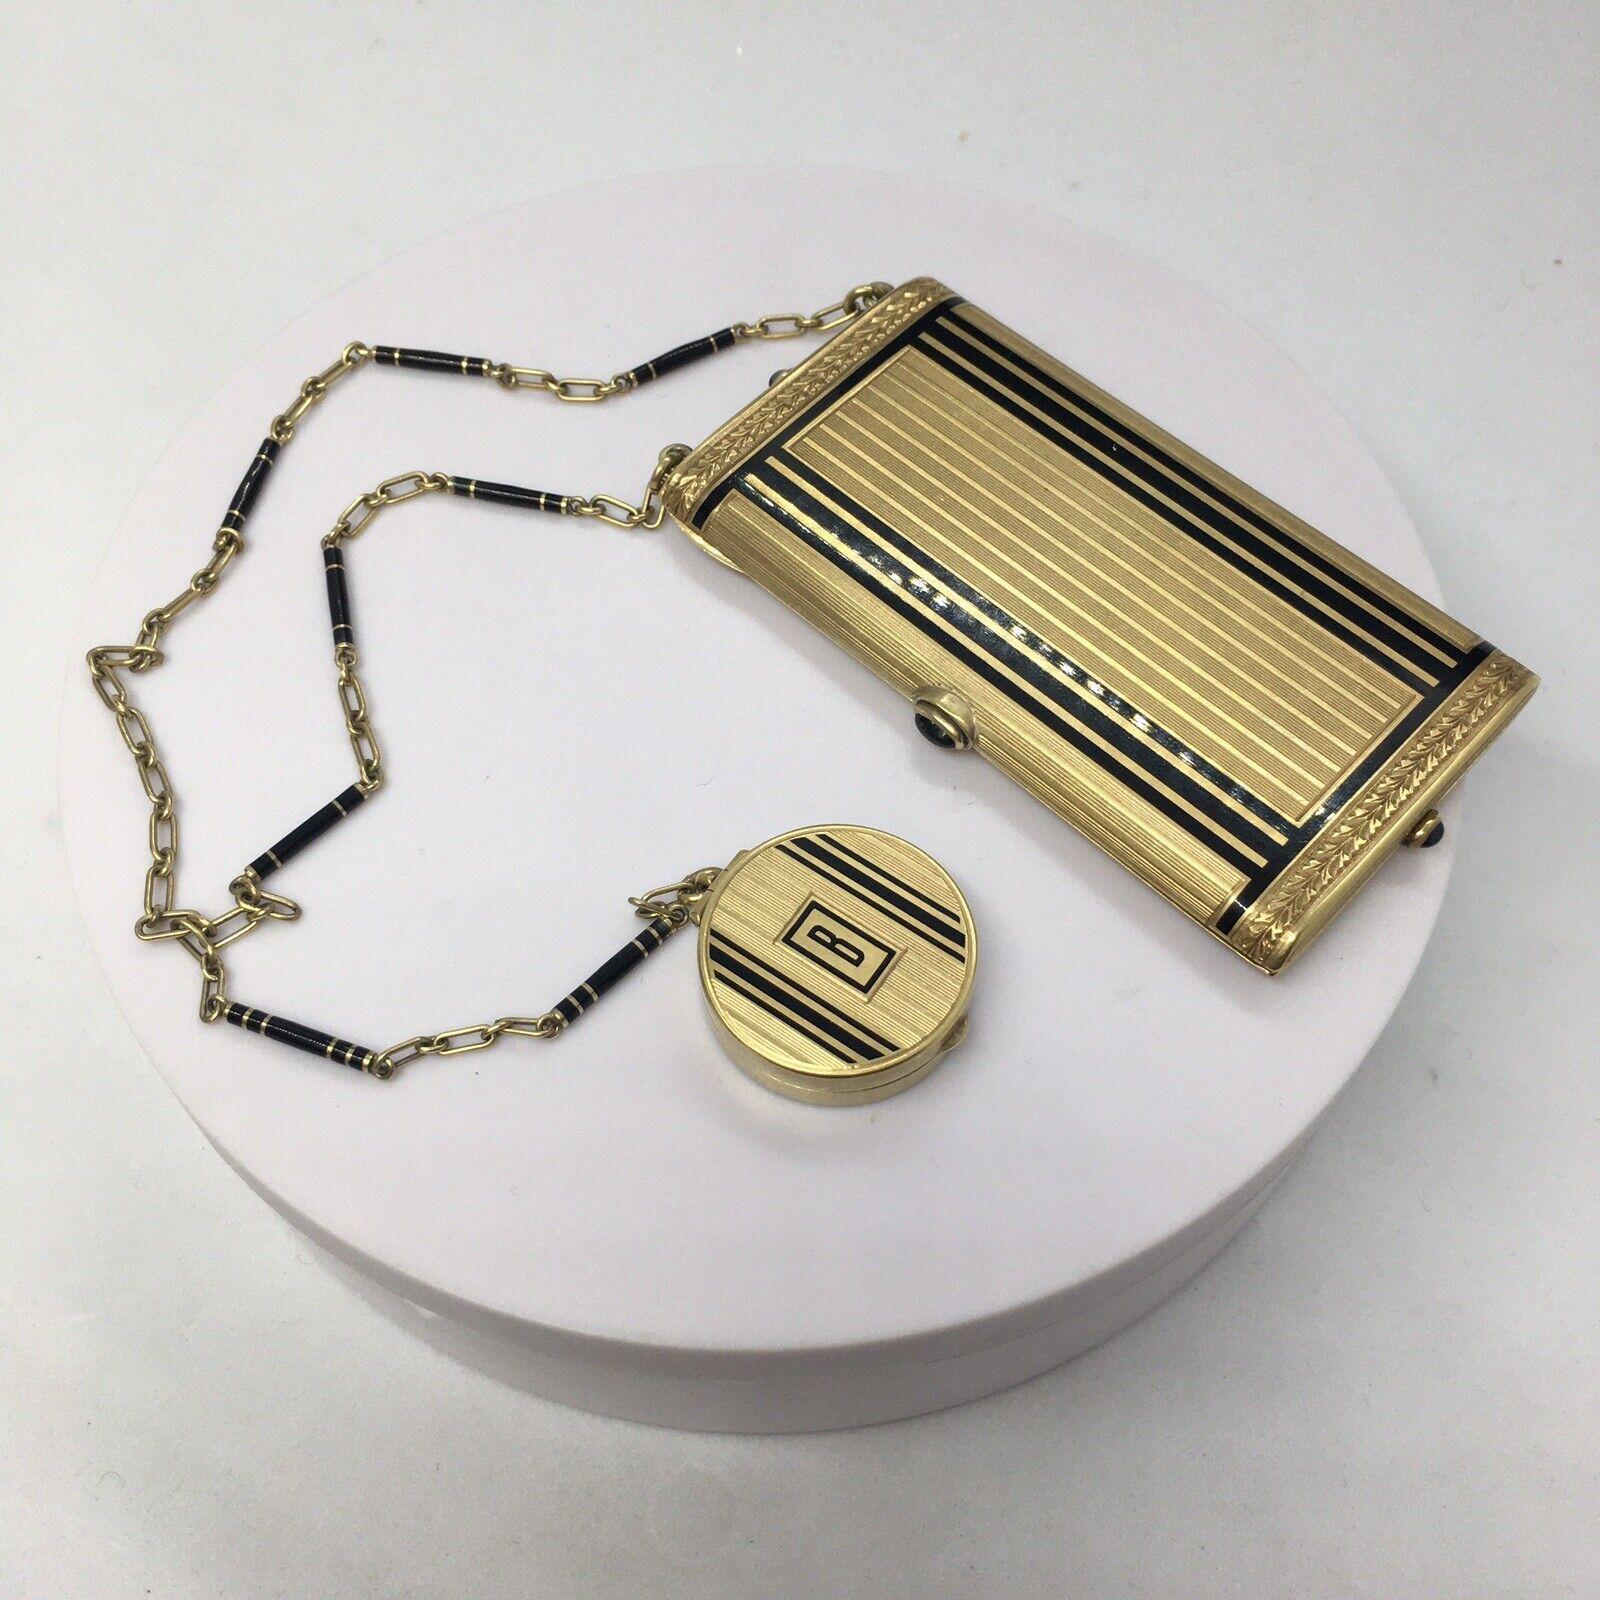 Art Deco 14K GOLD  Makeup Case Compact Powder Rouge 1930s American made 

99.2 gram
Marked’14K’
3 inch long 1,75 inch wide .25 inch thick
Pill box 1 inch in diameter 1/4 inch thick 7.25 inch long chain
Three sapphire push bottom initial B
In good